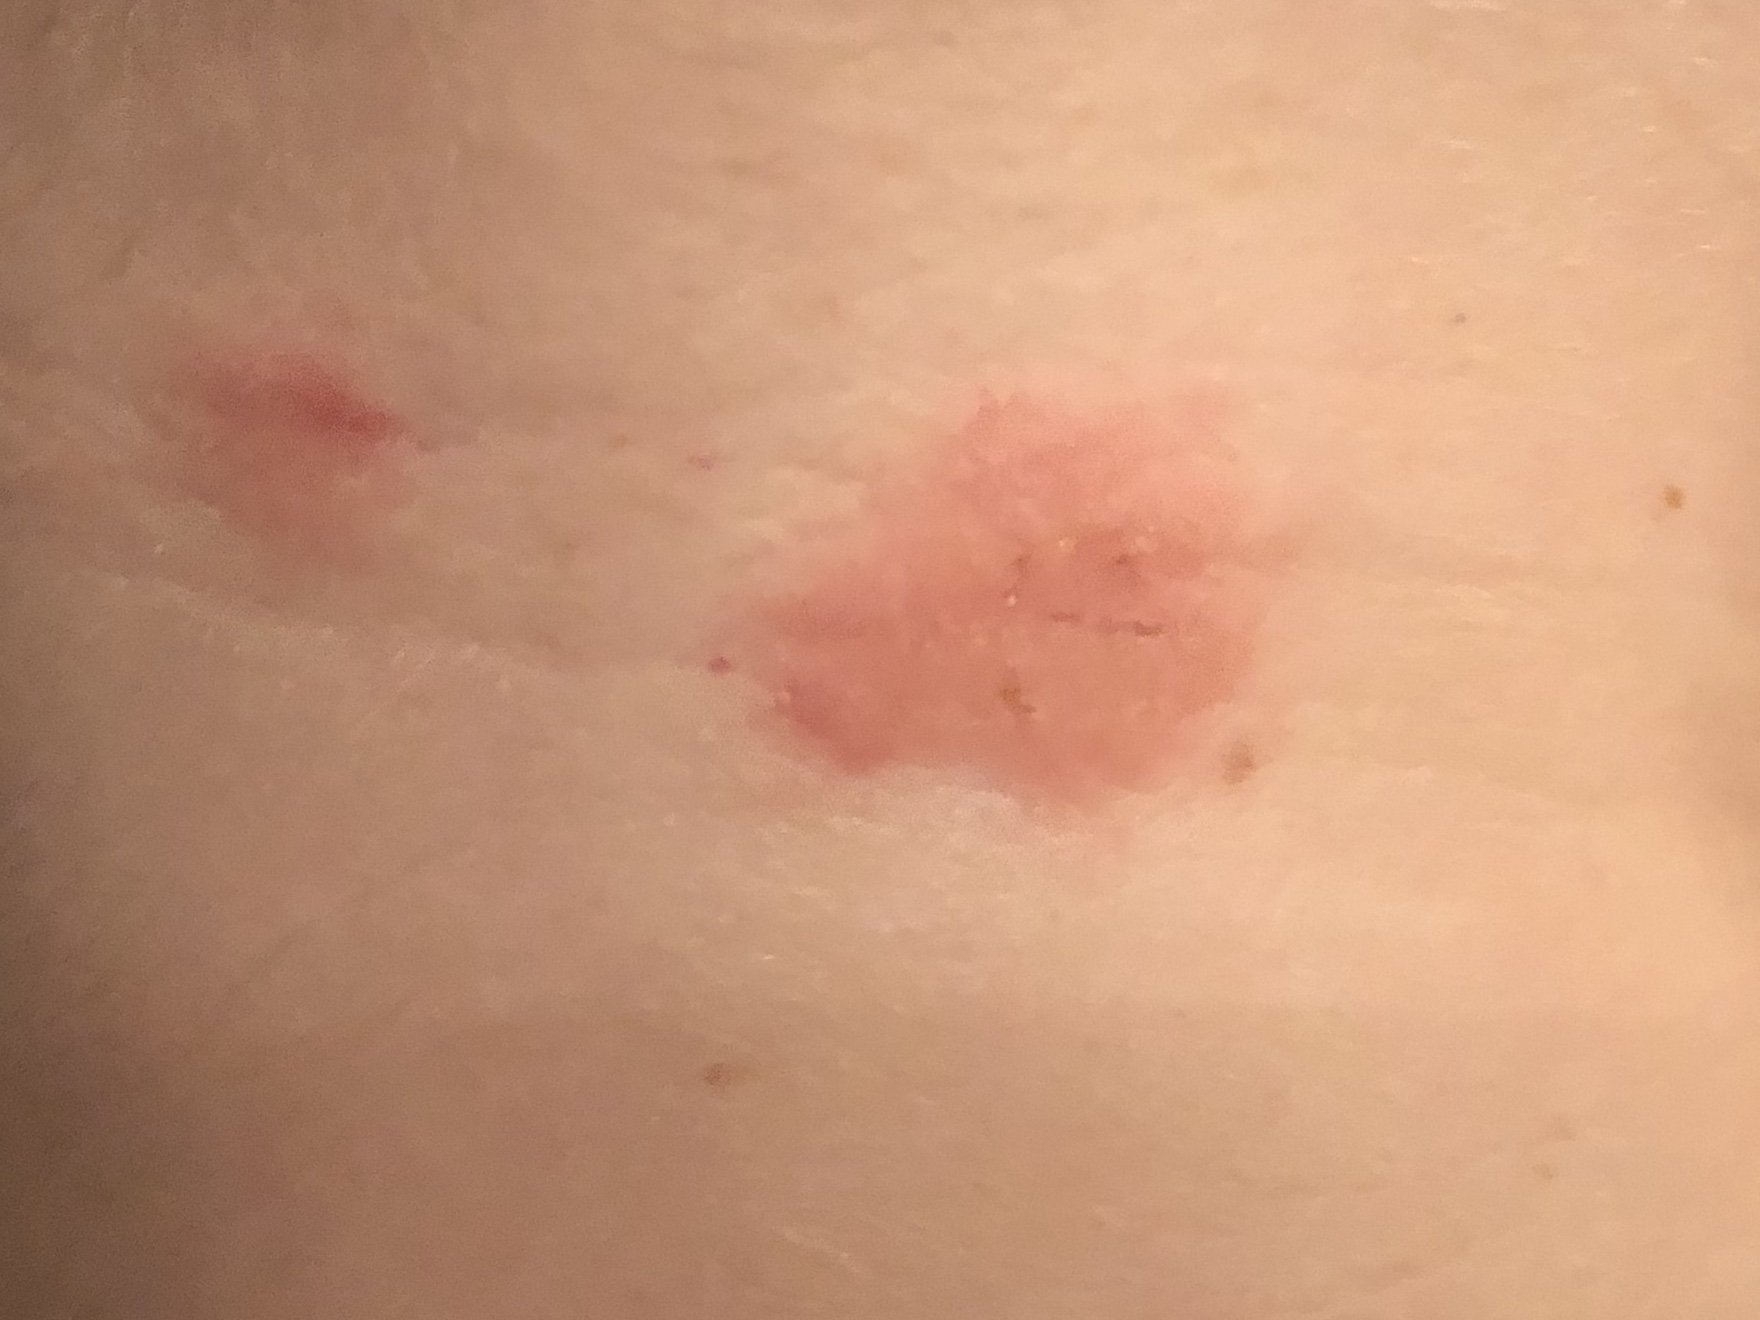 Does this look like eczema, psoriasis or something else ...